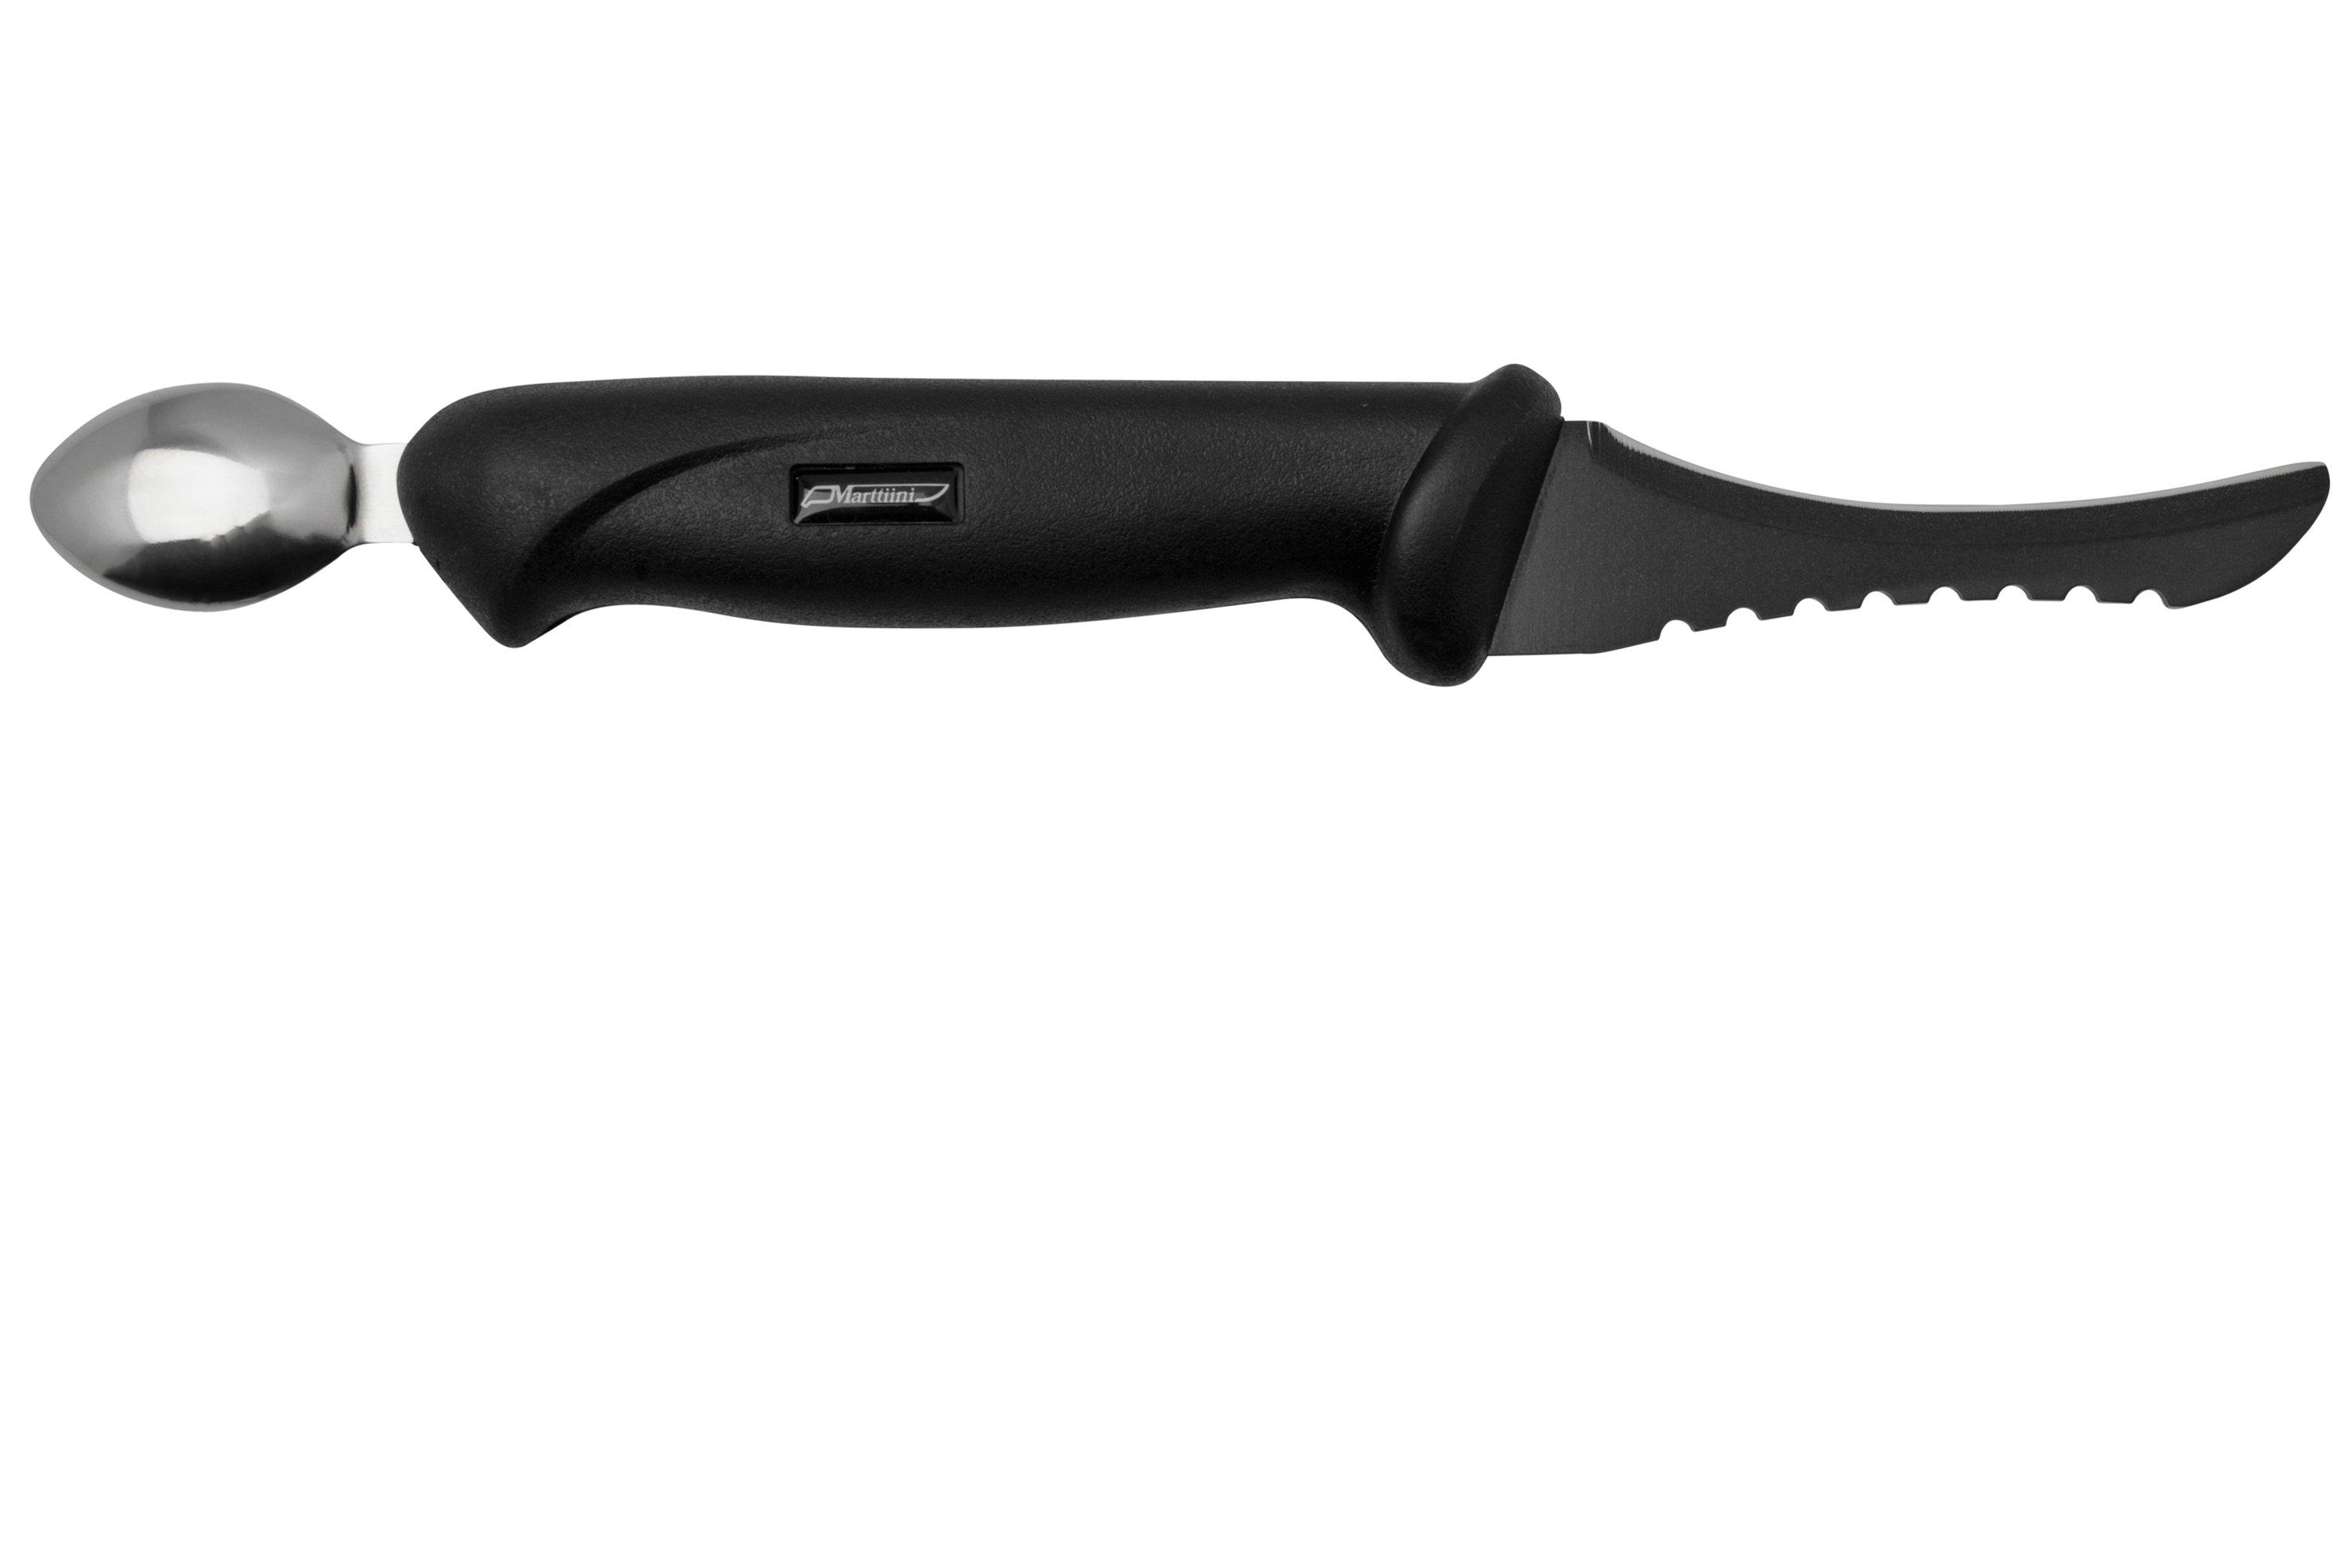 Marttiini Fish Cleaner, 175019, Black Stainless Steel, scaling knife